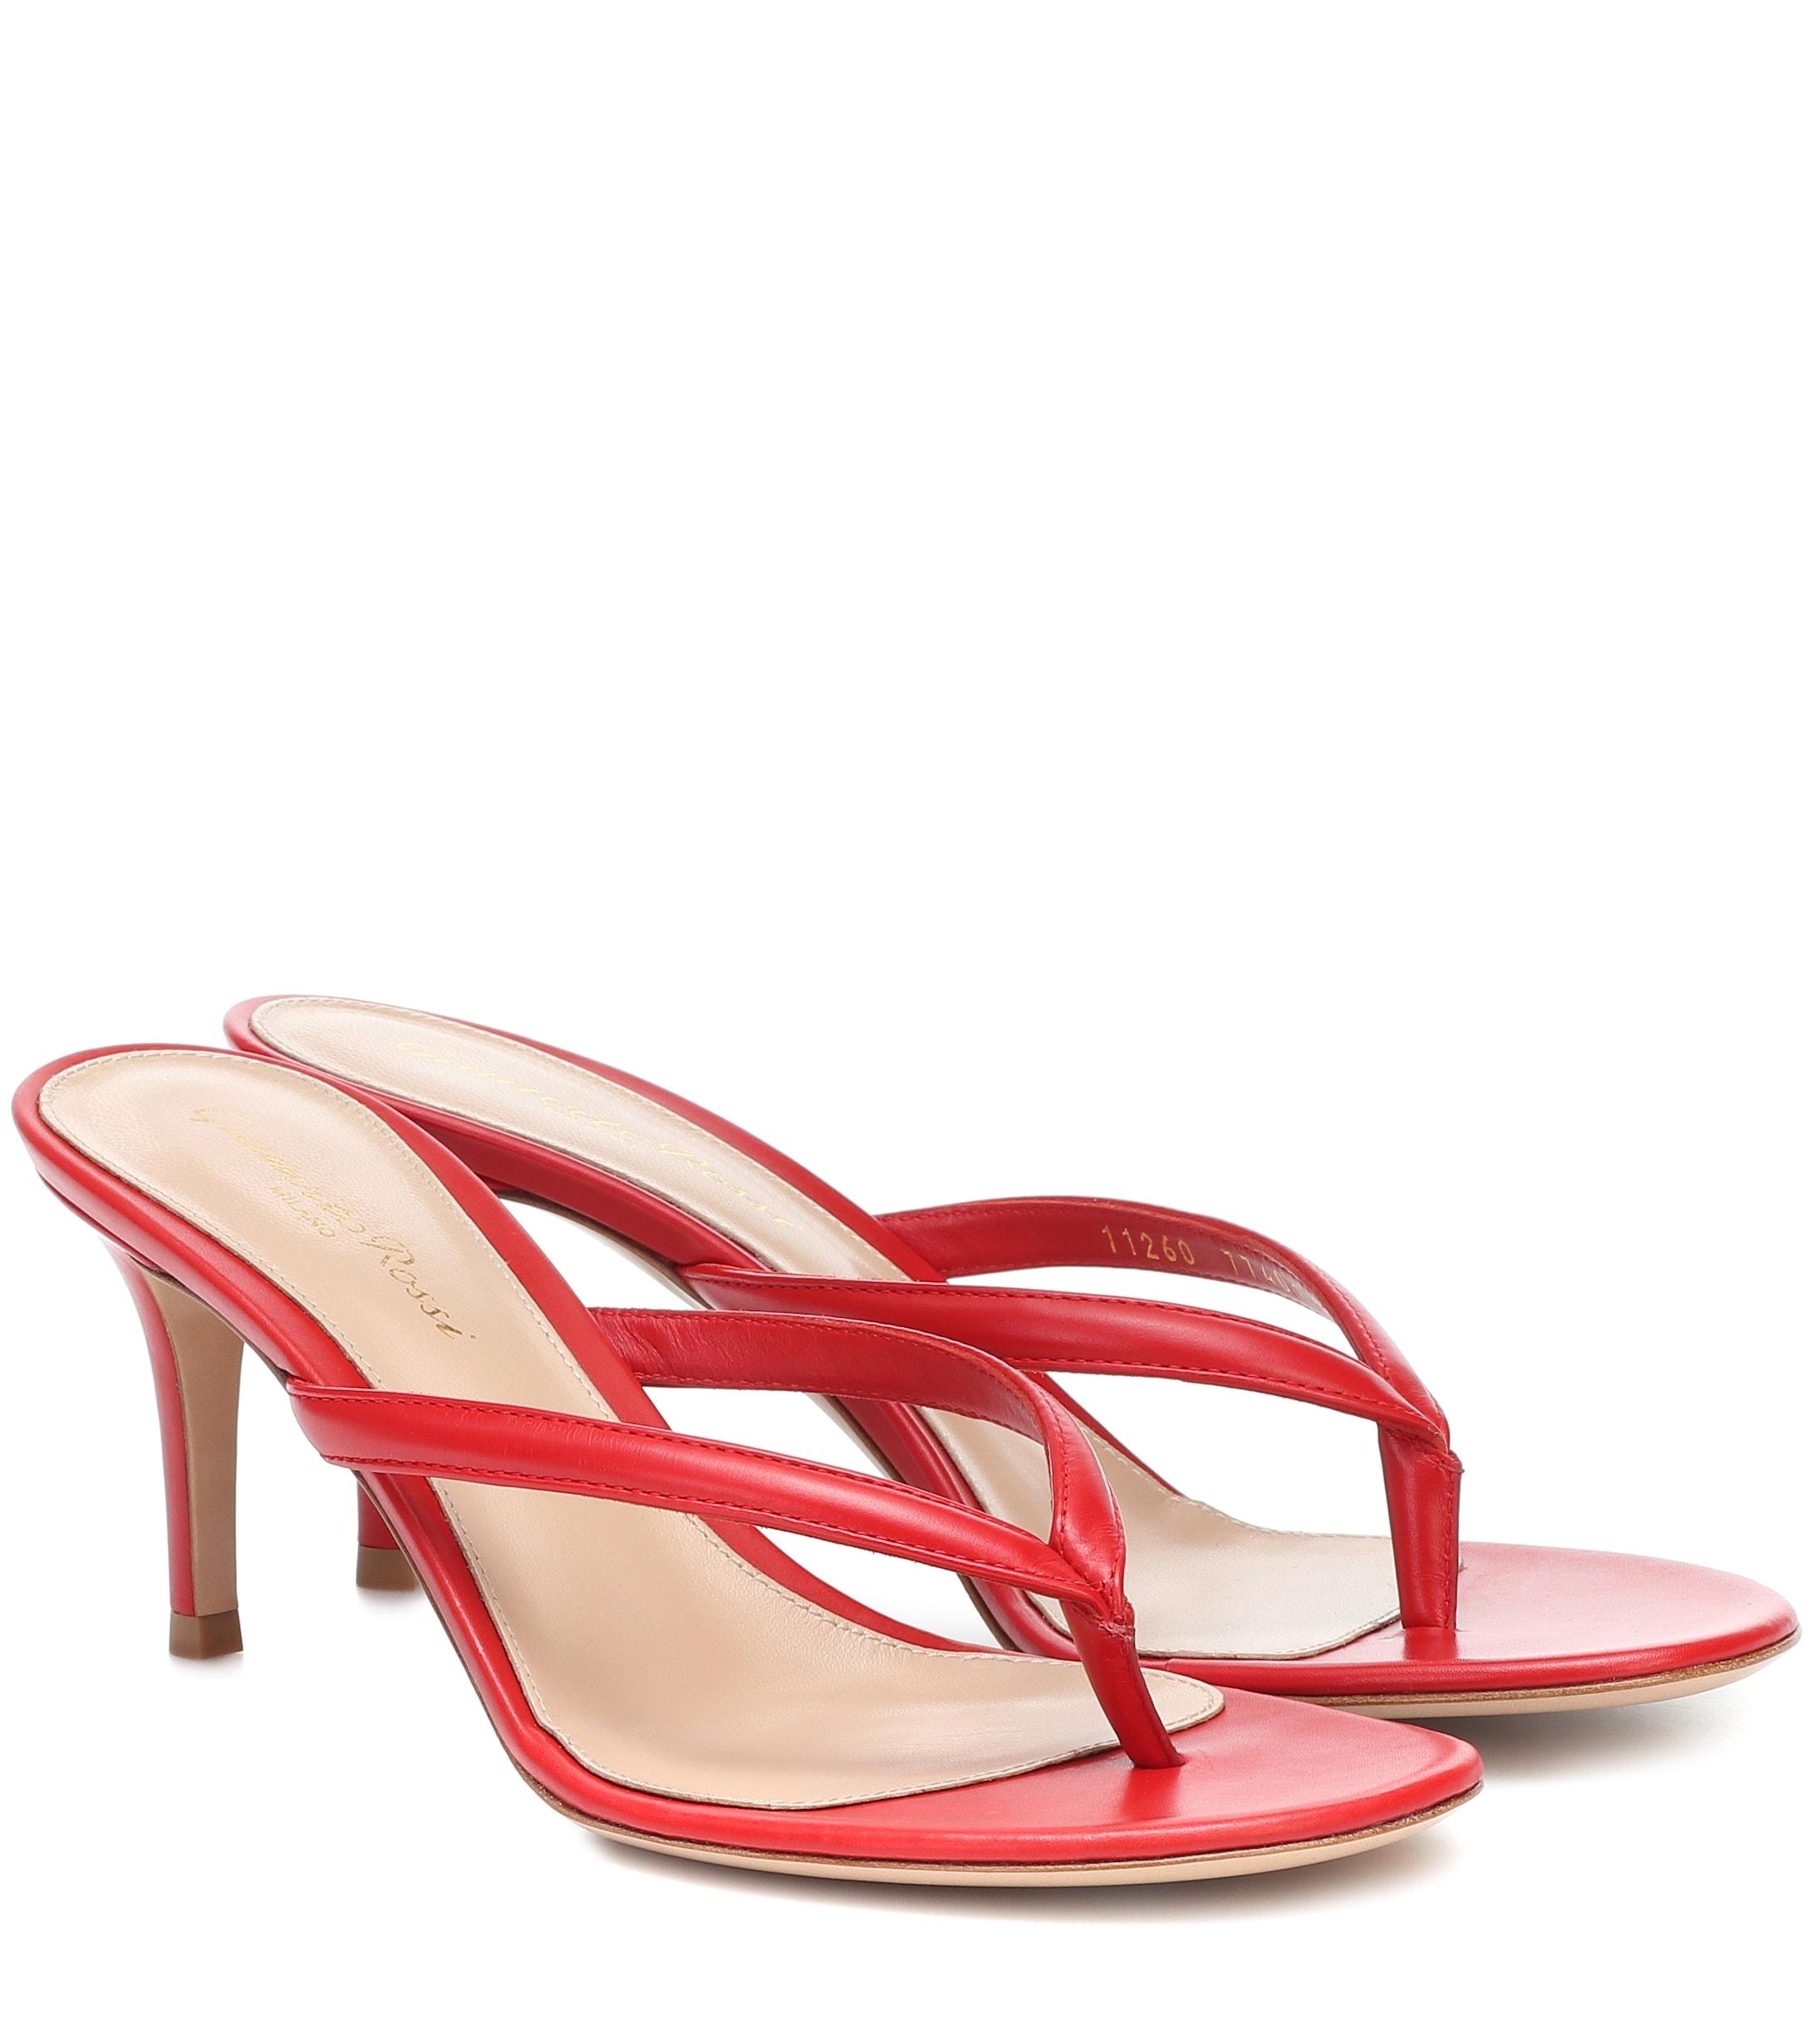 Gianvito Rossi Calypso 70 Leather Thong Sandals in Red - Lyst